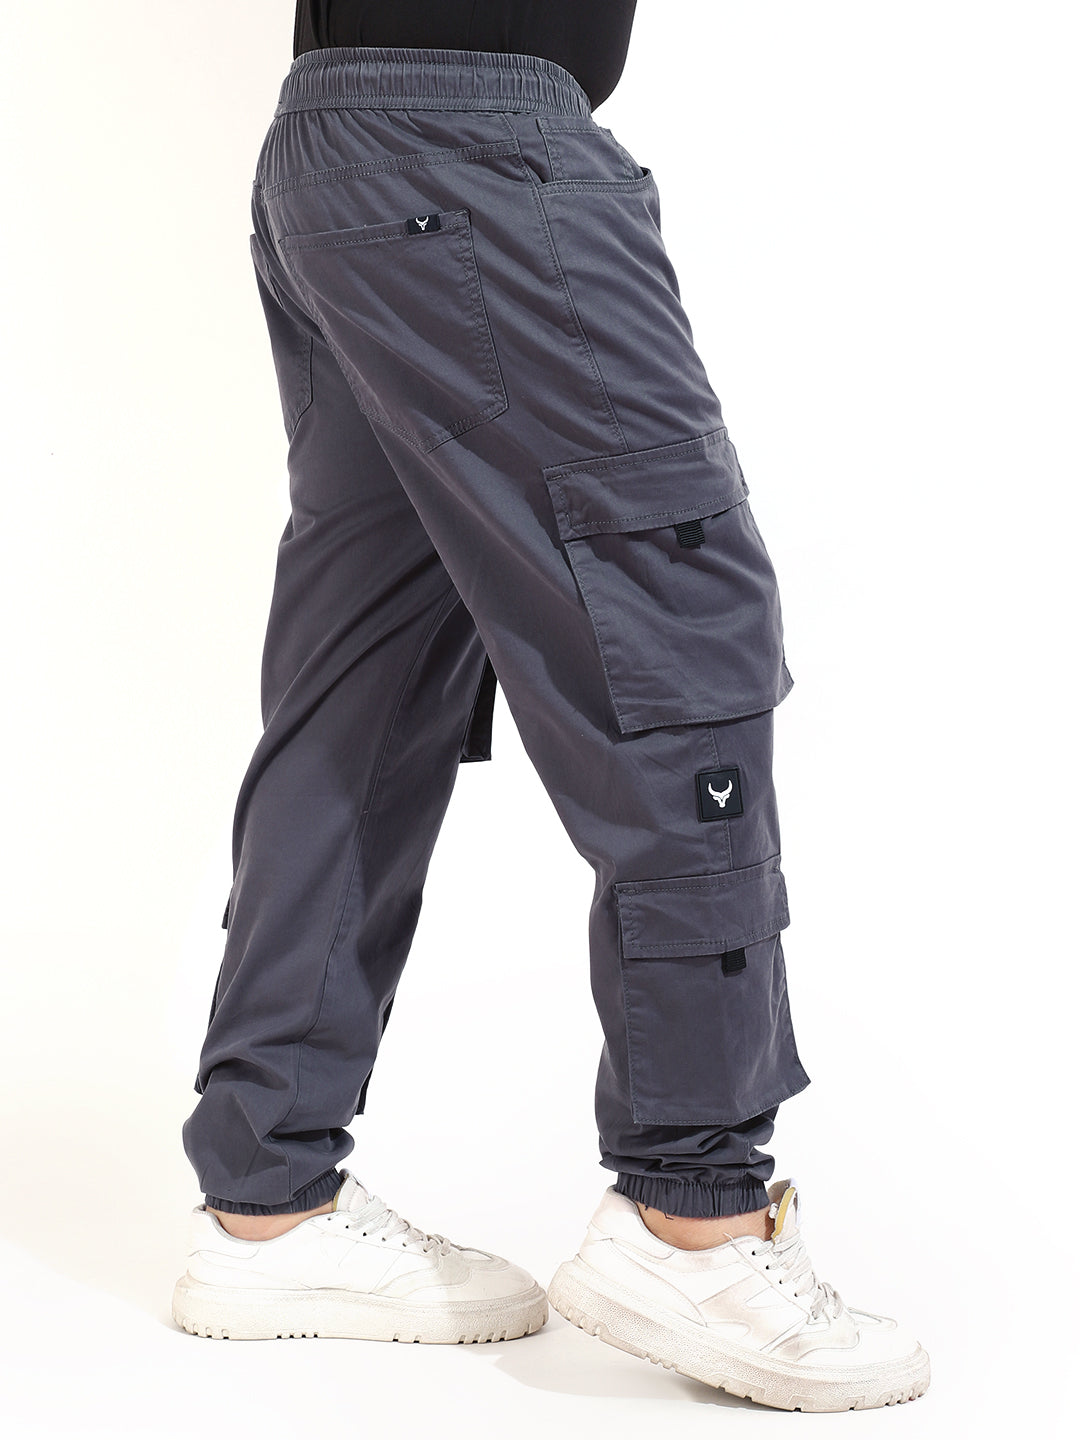 Ash Grey Cotton Twill Baggy Fit 8 Pocket Cotton Cargo